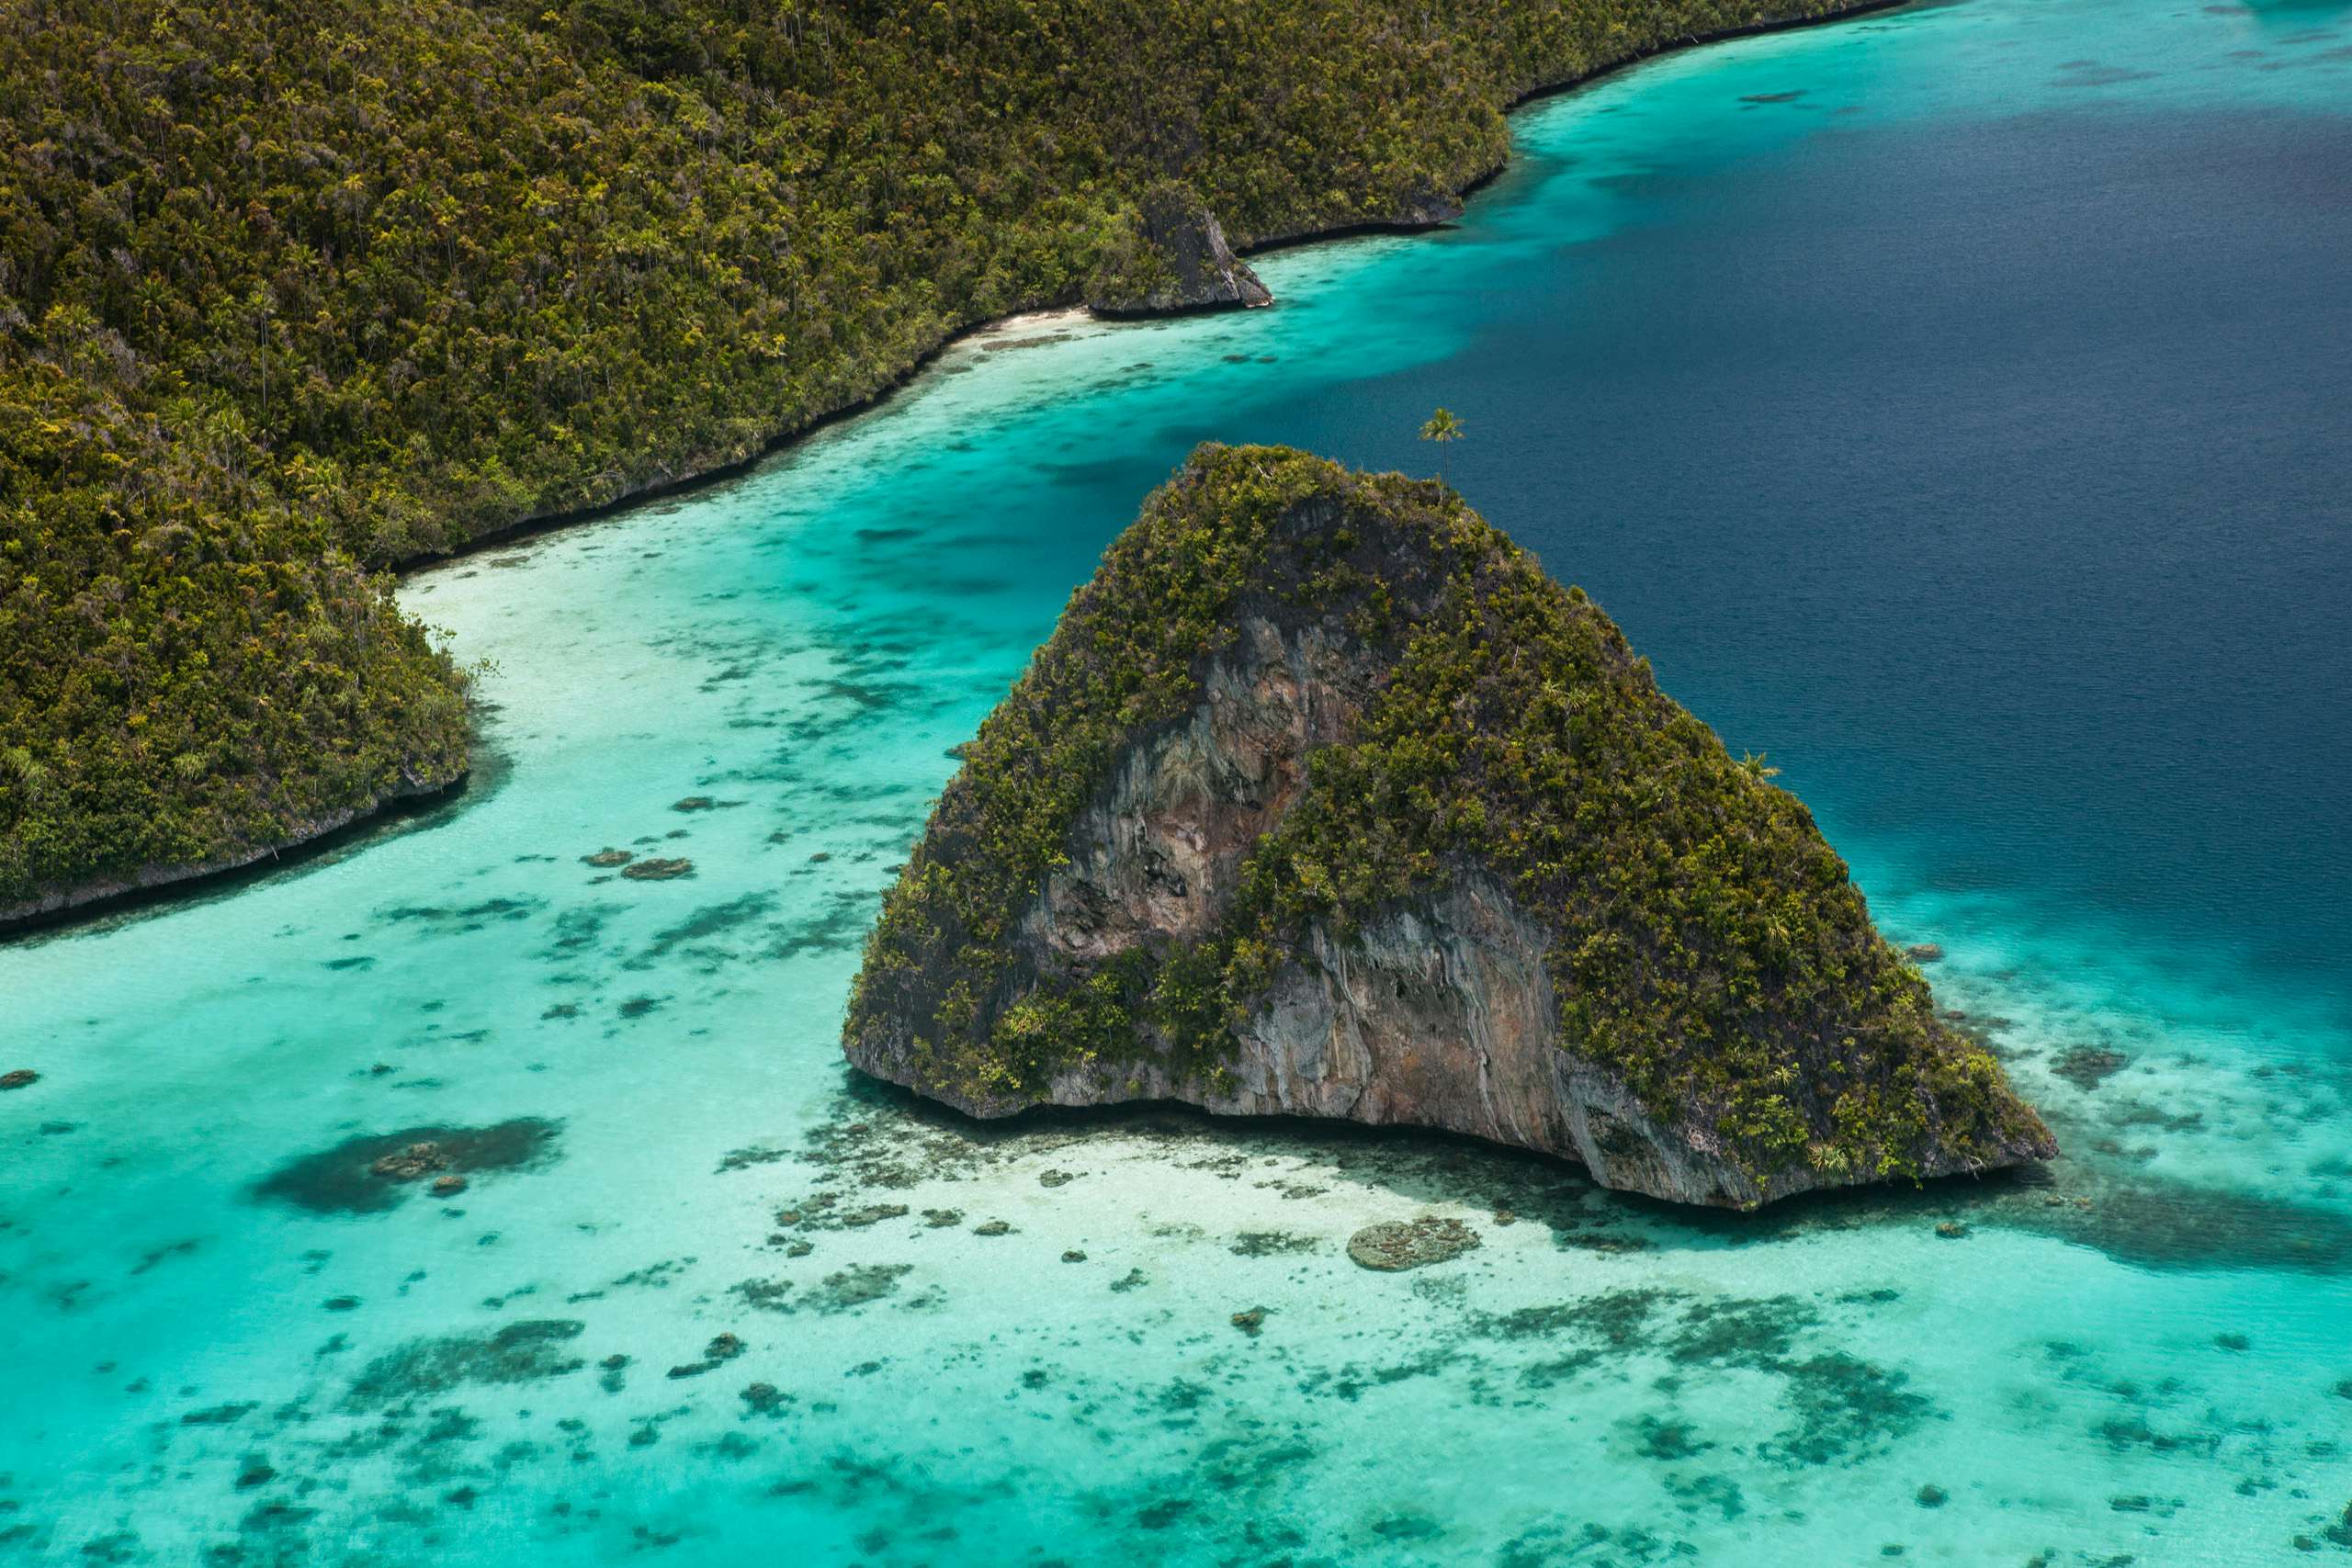 Indonesia Yacht Charter - Limestone islands rise from a gorgeous lagoon in Wayag, Raja Ampat, Indonesia. This remote, tropical region is known as the heart of the Coral Triangle due to its incredible marine biodiversity.